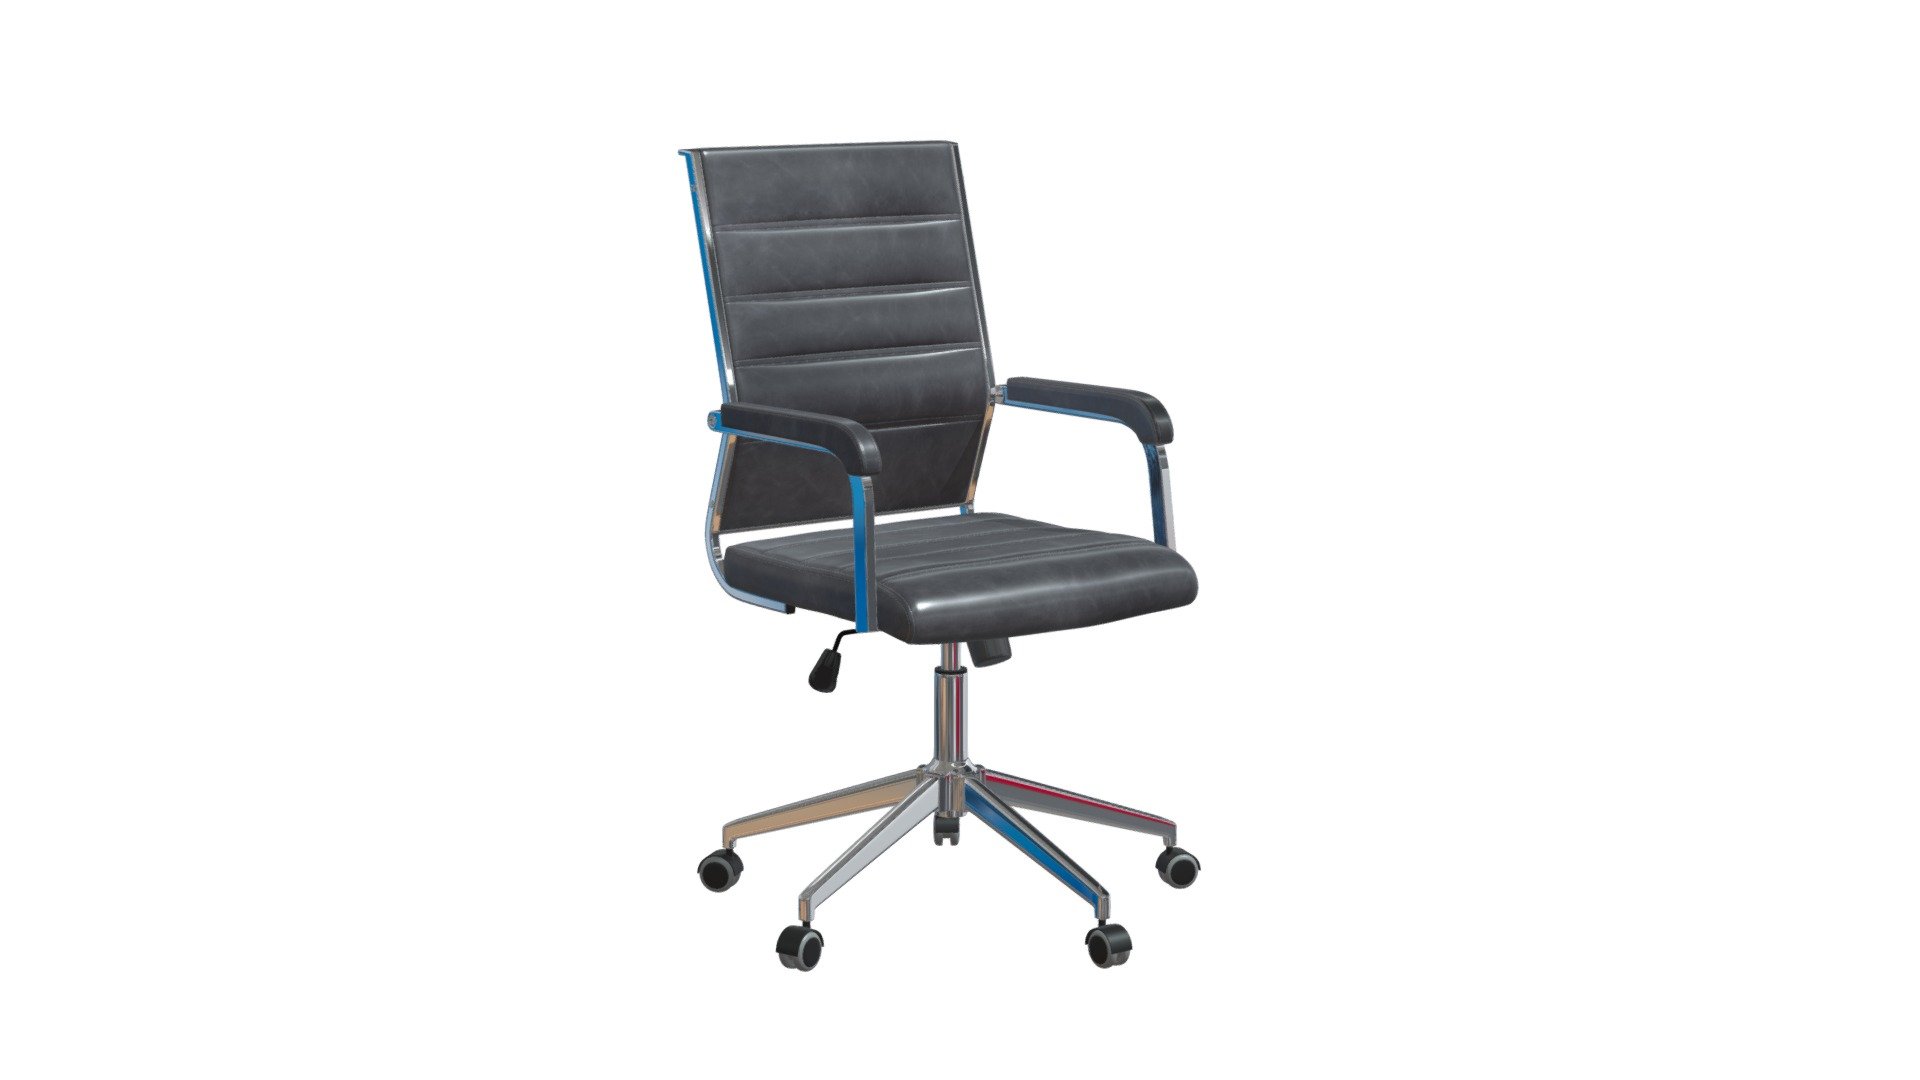 https://zuomod.com/liderato-office-chair-gray

The Liderato Office Chair has mid century modern urban lines and looks great in any space. With a heavy duty vinyl covering and a sturdy steel frame, this chair fits in any dining room, home office, or even as a bedroom accent chair. The frame and base are chrome plated for a sleek modern look 3d model